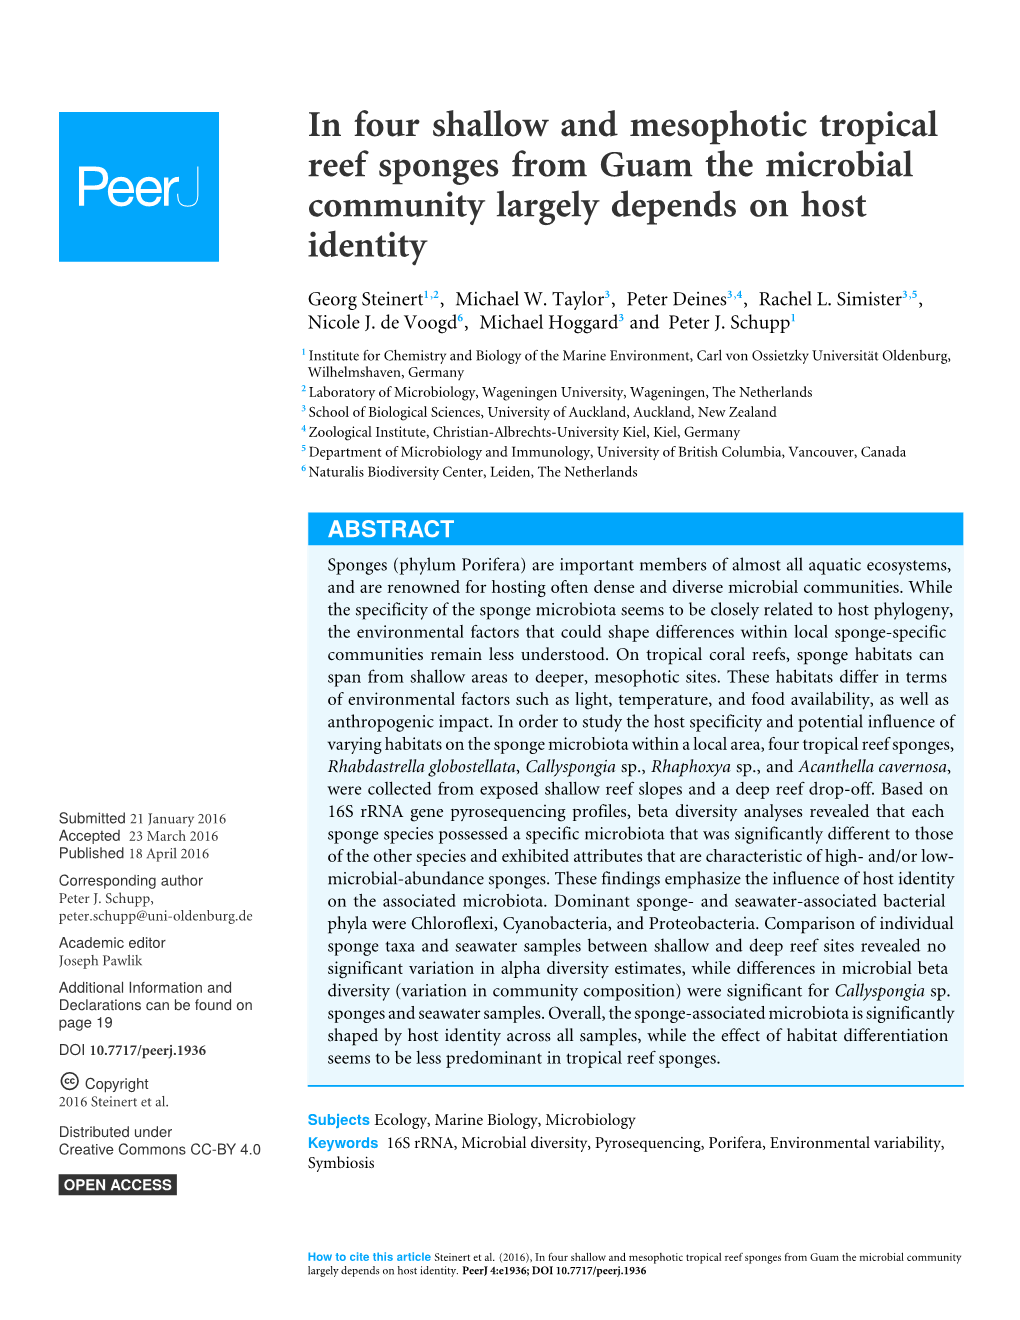 In Four Shallow and Mesophotic Tropical Reef Sponges from Guam the Microbial Community Largely Depends on Host Identity